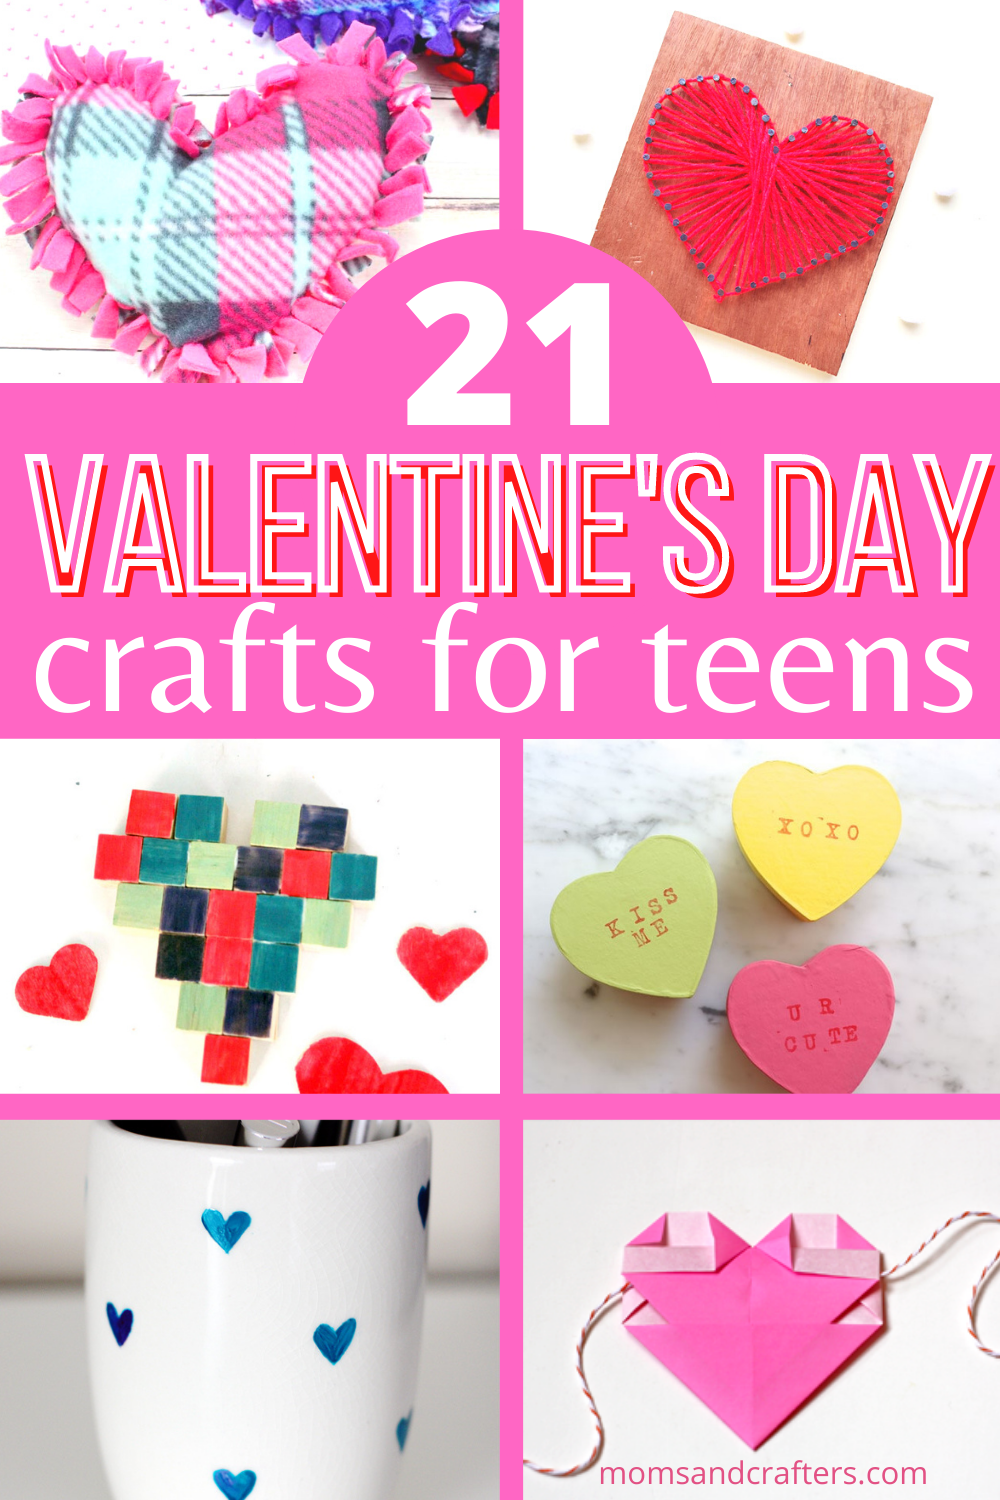 Valentine's Day Class Party Ideas - Joy in the Works